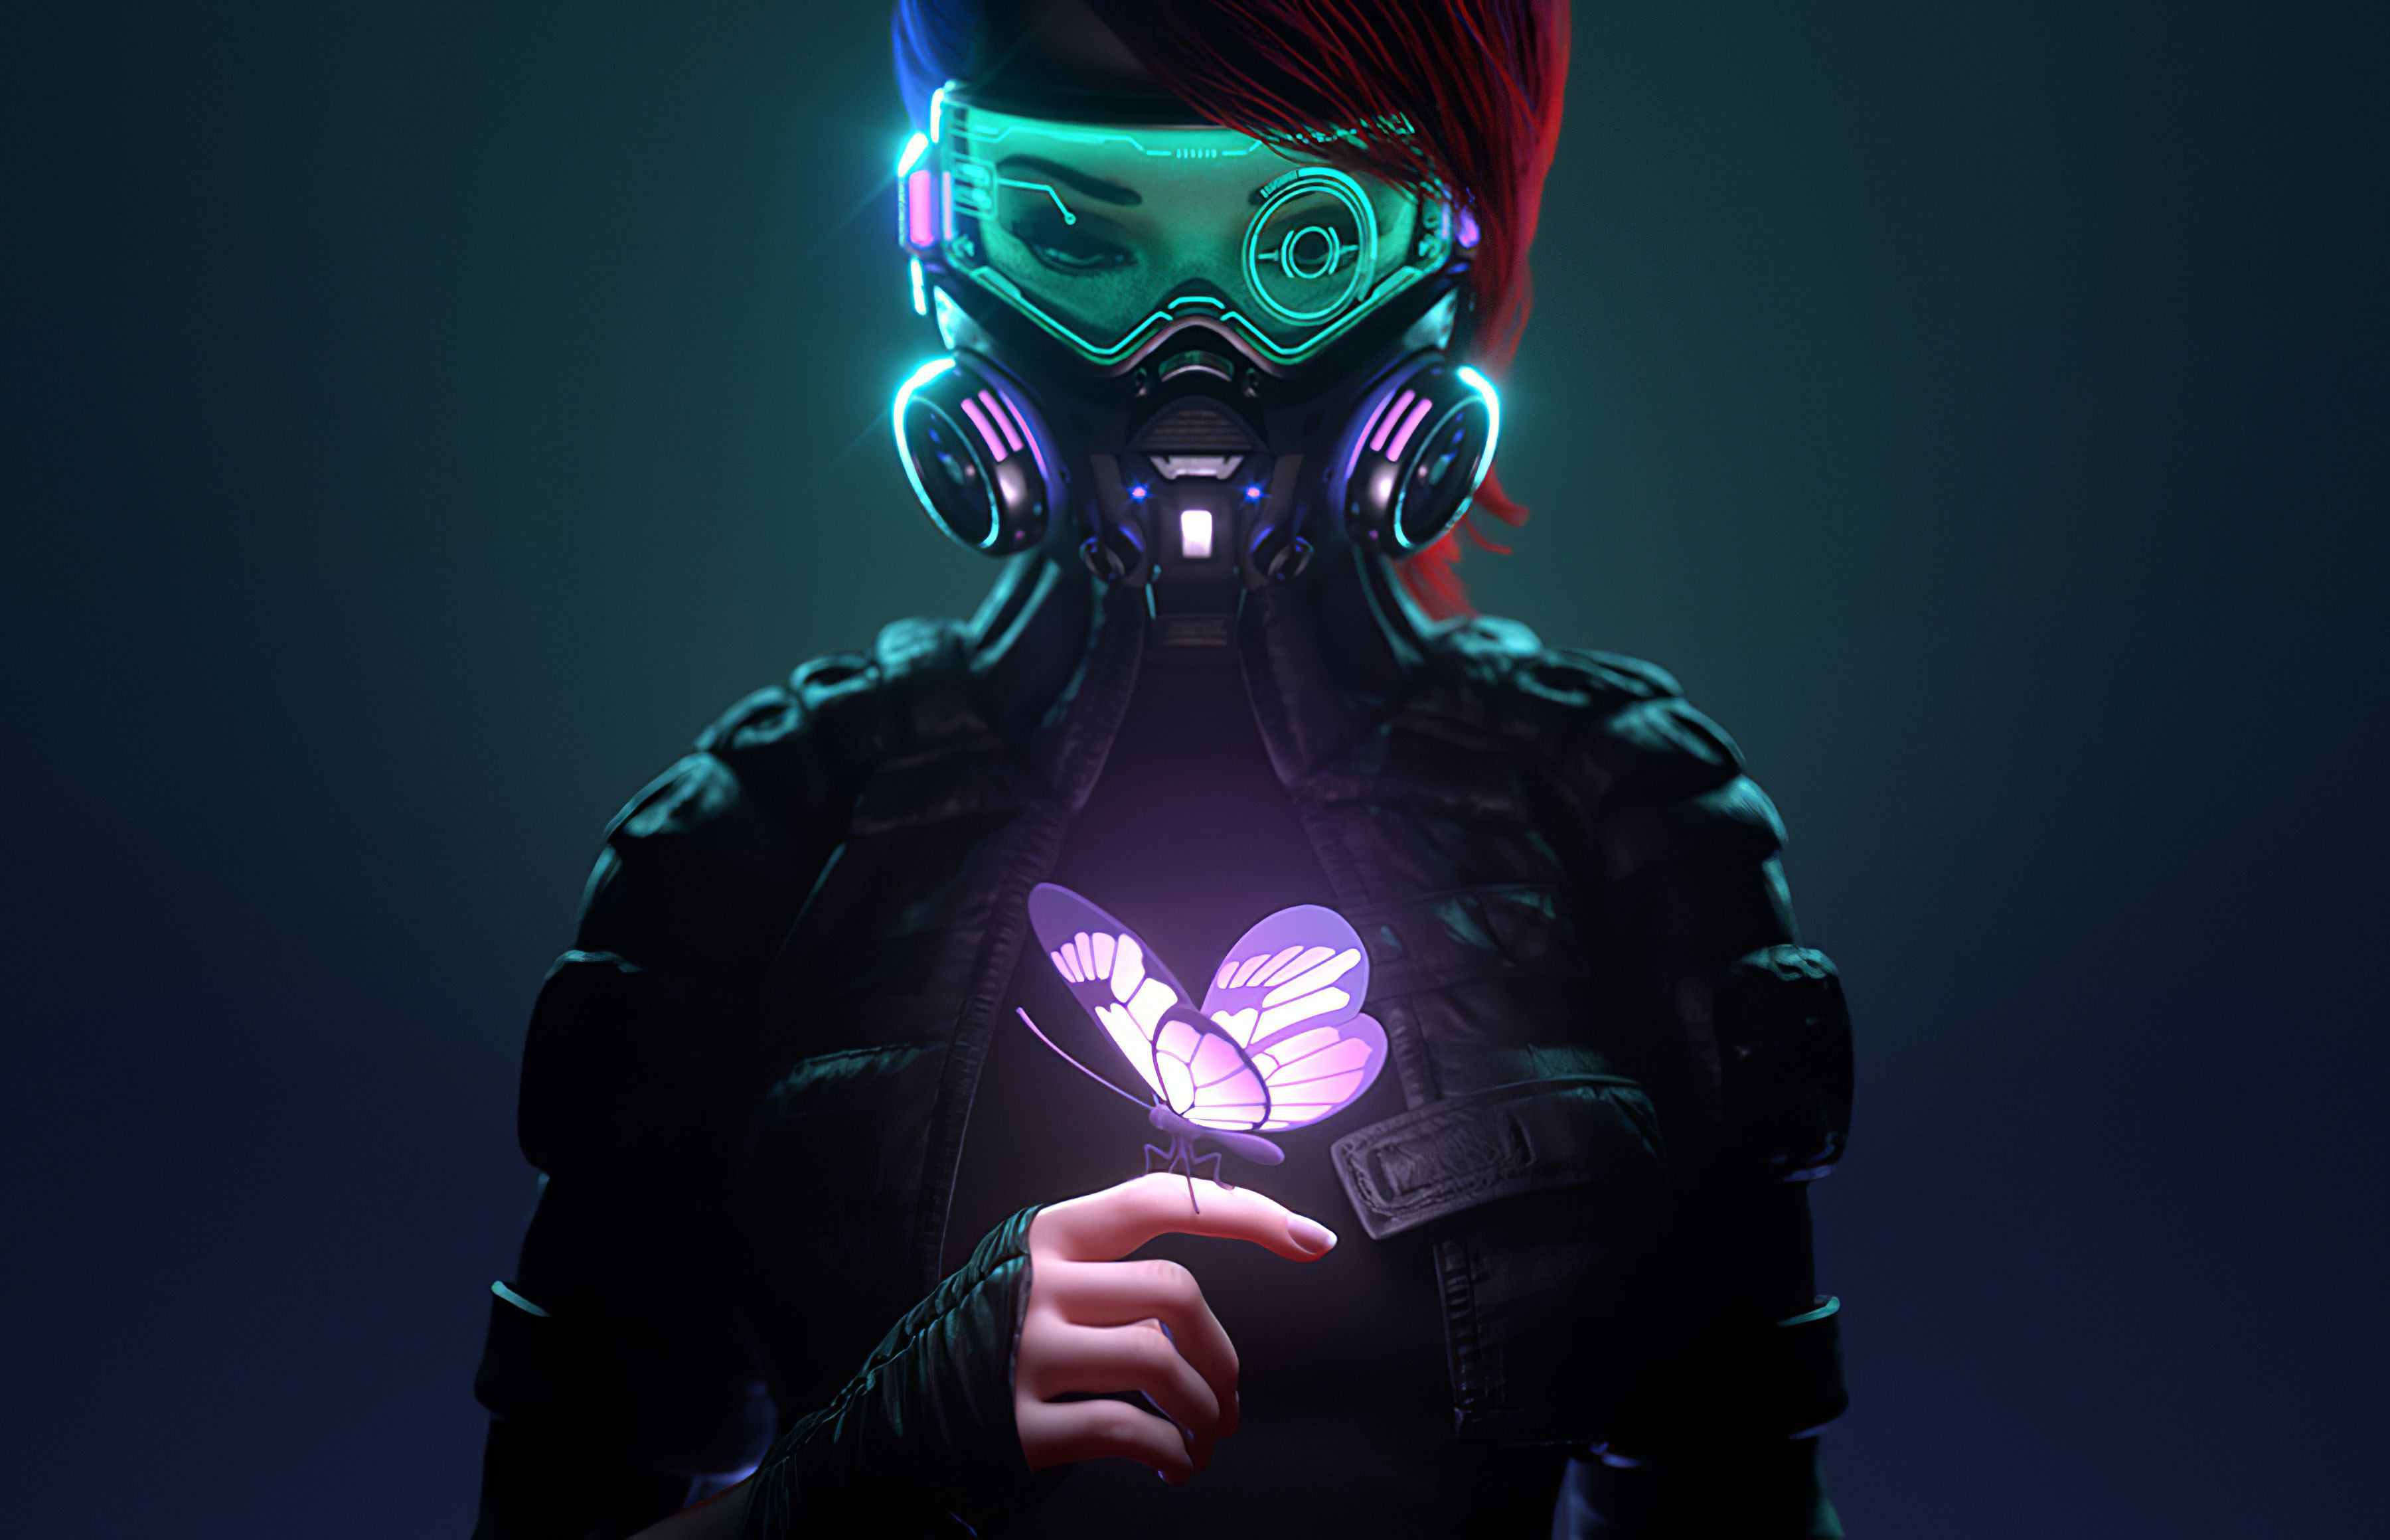 Cyberpunk Girl In A Gas Mask Looking At The Glowing Butterfly Landed On Her Finger 4k 720P HD 4k Wallpaper, Image, Background, Photo and Picture